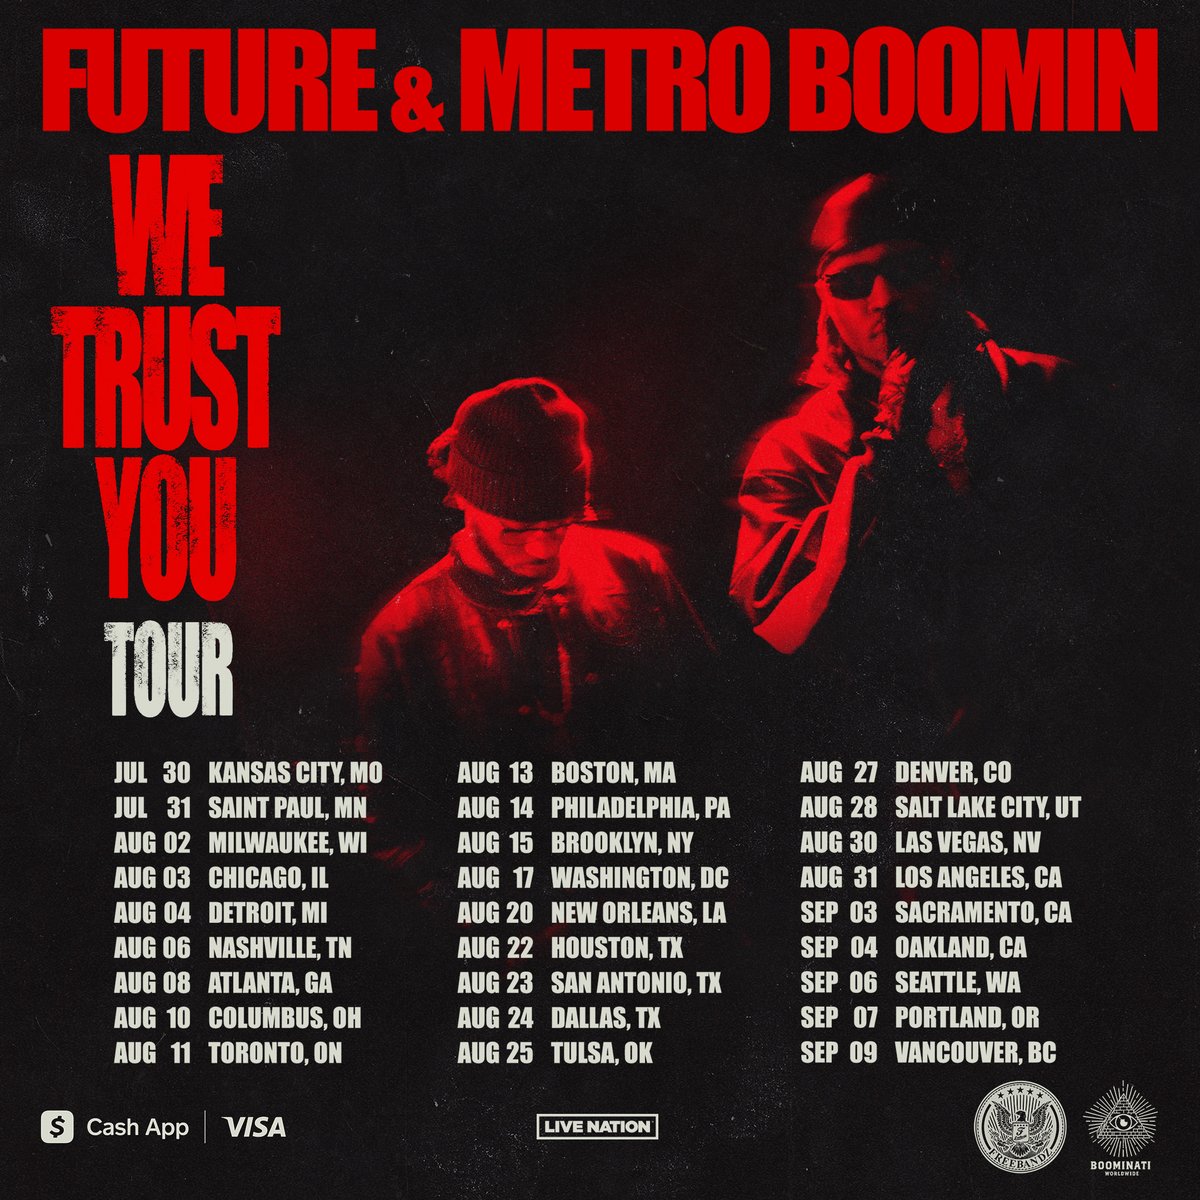 FUTURE & METRO BOOMIN
'WE TRUST YOU' TOUR
JULY - SEPTEMBER